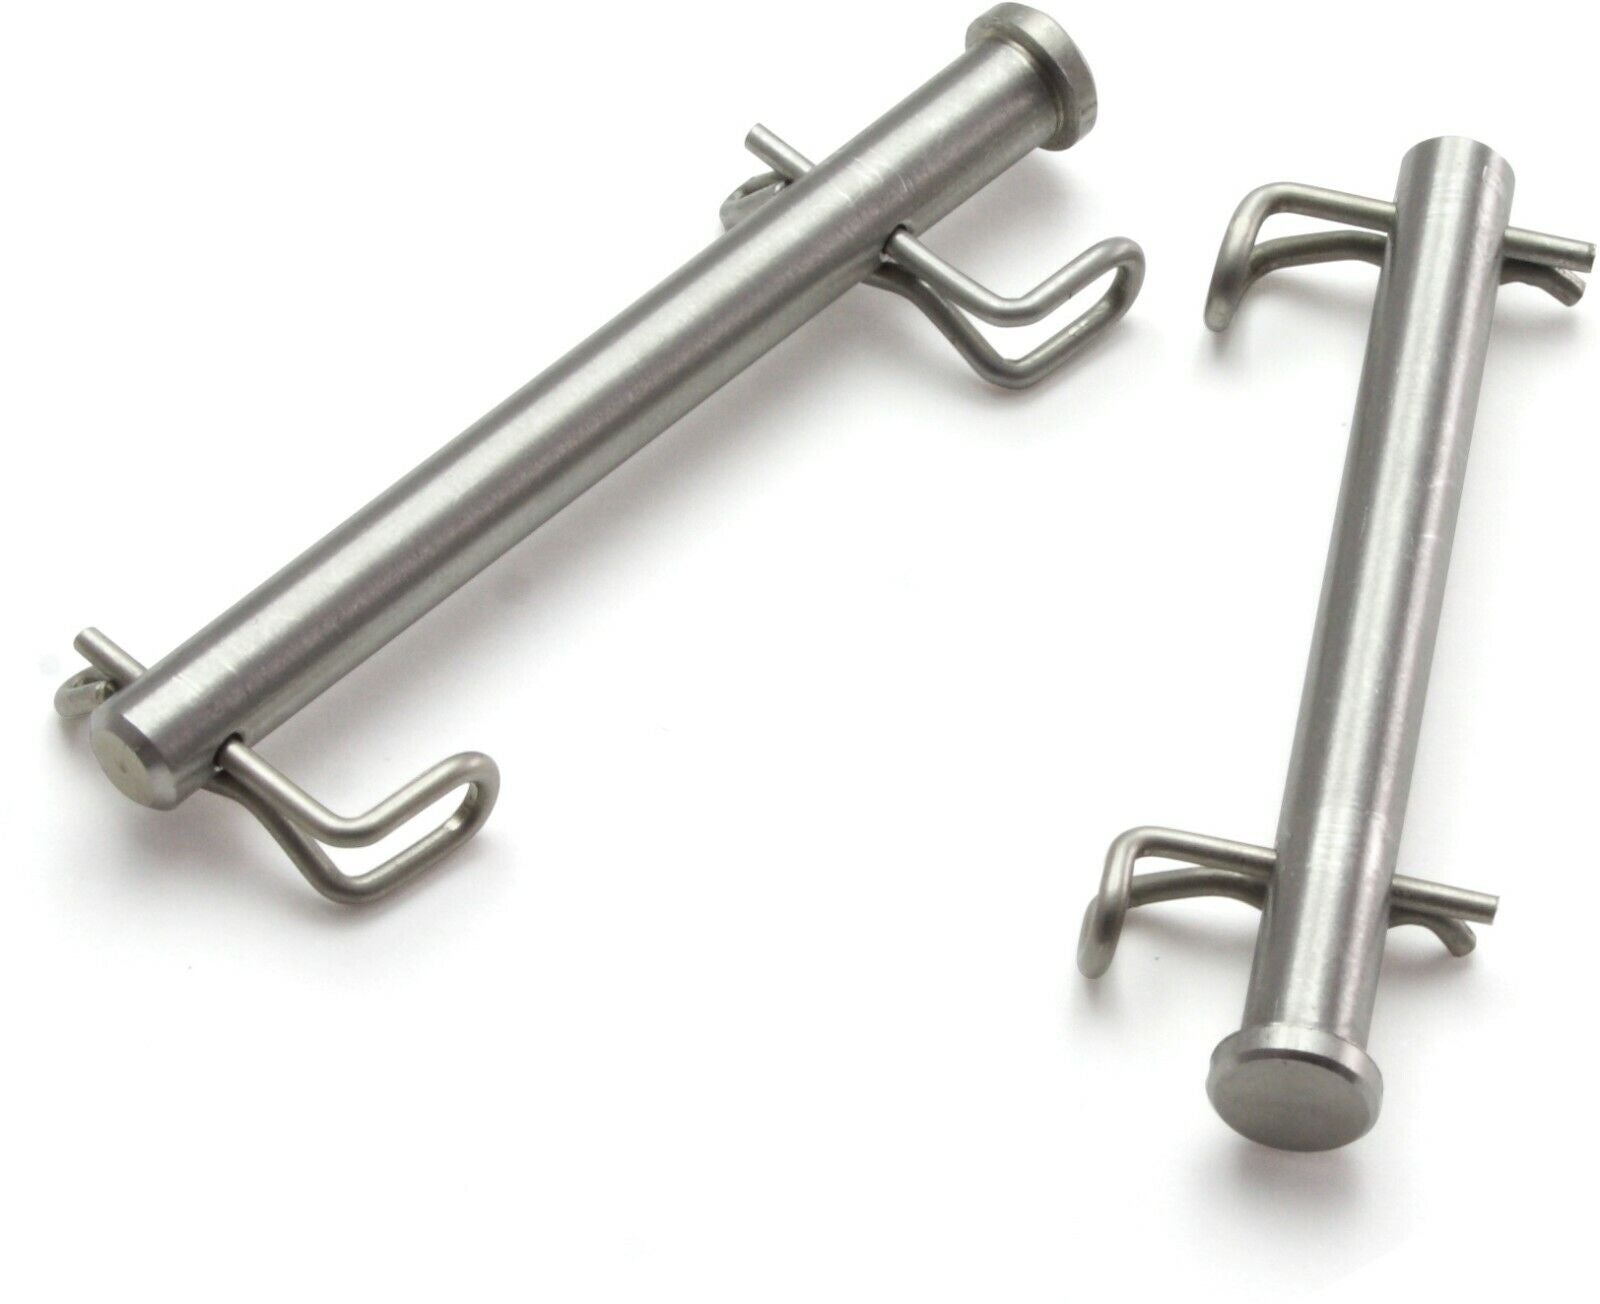 Stainless brake pin set 2 pieces for YZ YZF motorcycles displayed on white background